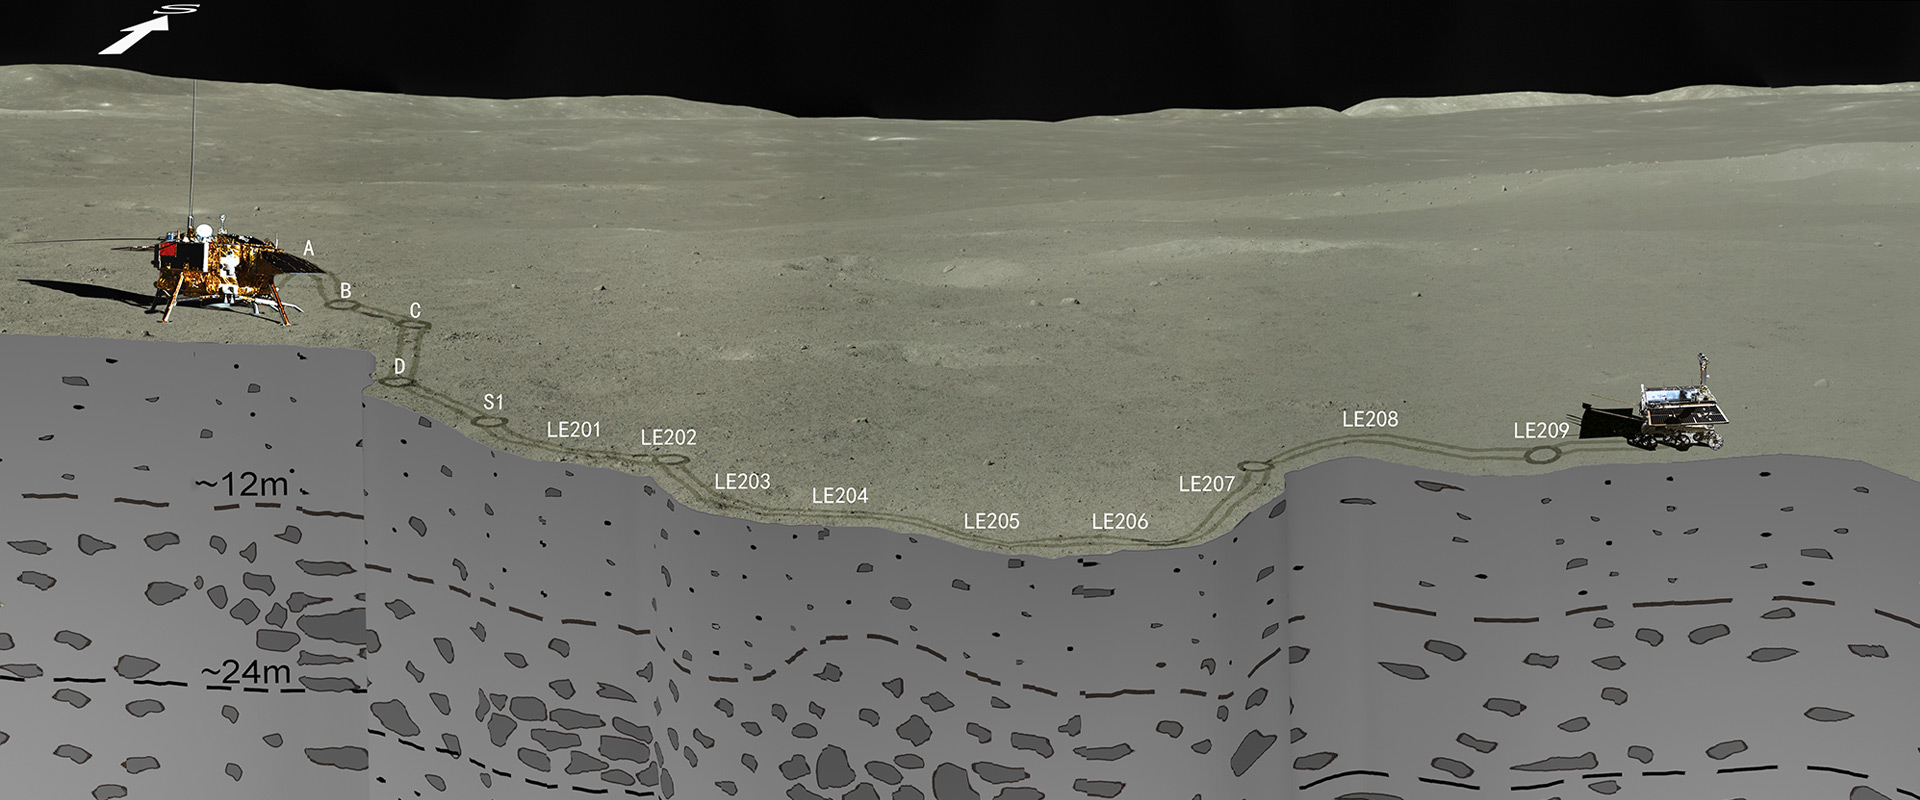 Digging into the Far Side of the Moon: Chang'E-4 Probes 40 Meters into Lunar Surface